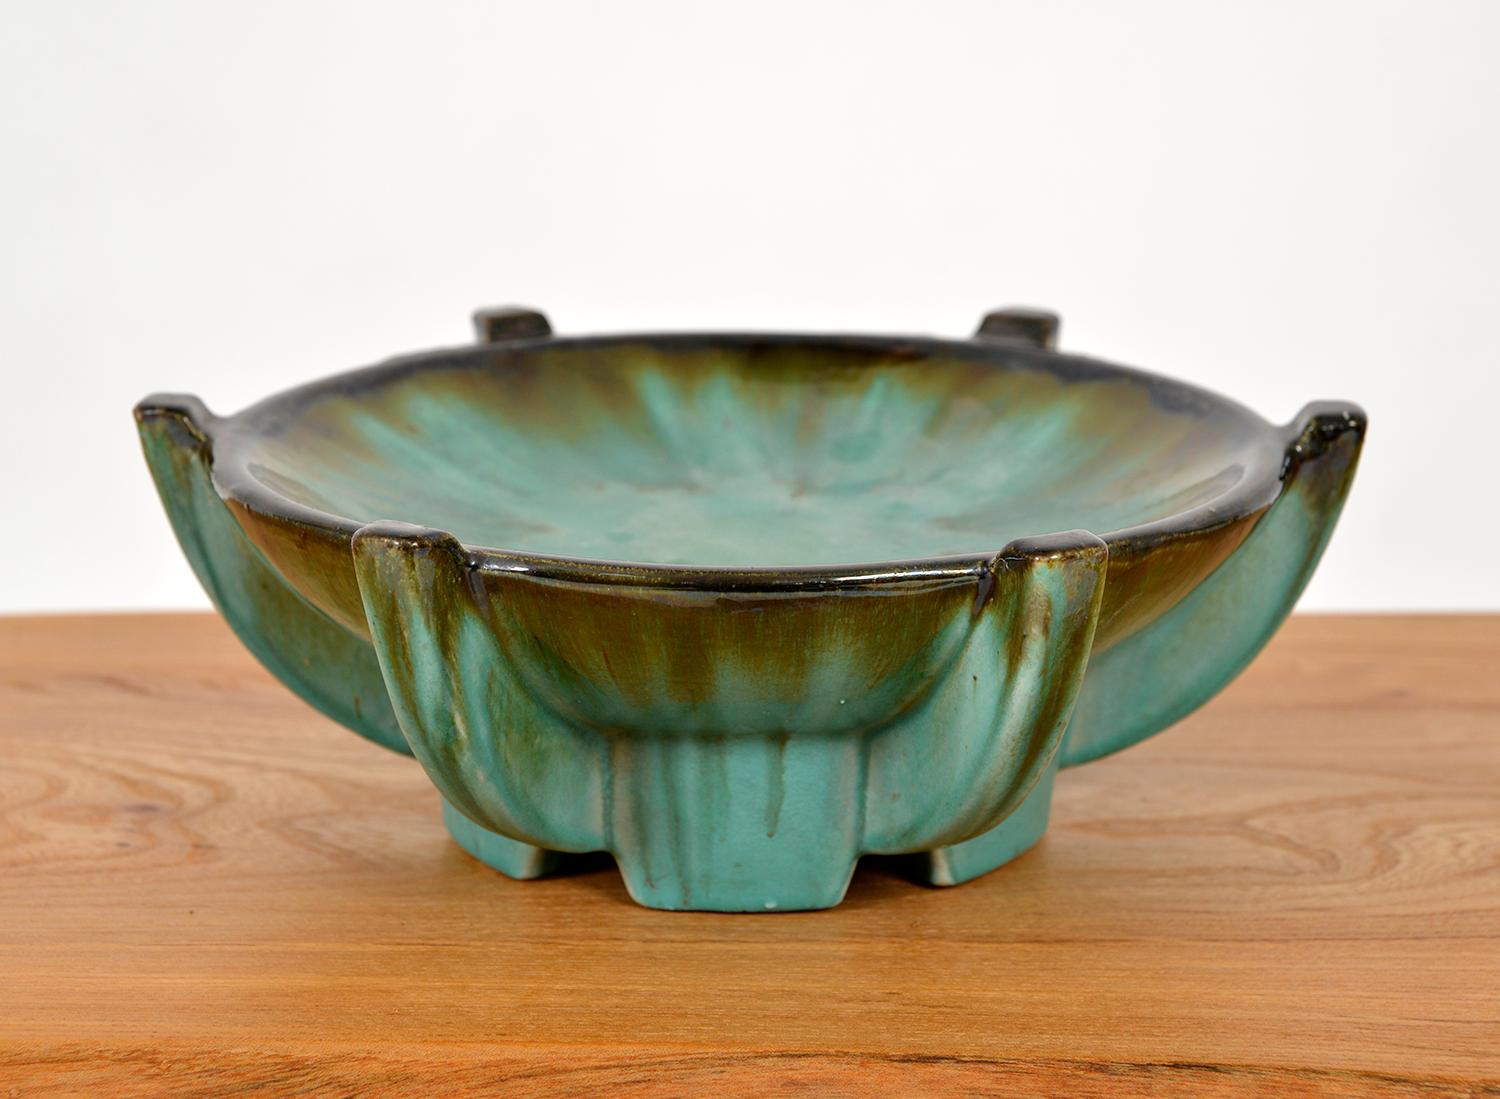 This very stylish art pottery Tazza by Faïenceries de Thulin has an unmistakable Art Deco feel with a wonderful drip glazed decorative exterior in greens and turquoise. Moulded to the base ‘Made in Belgium’ with the mould or pattern number 293. In